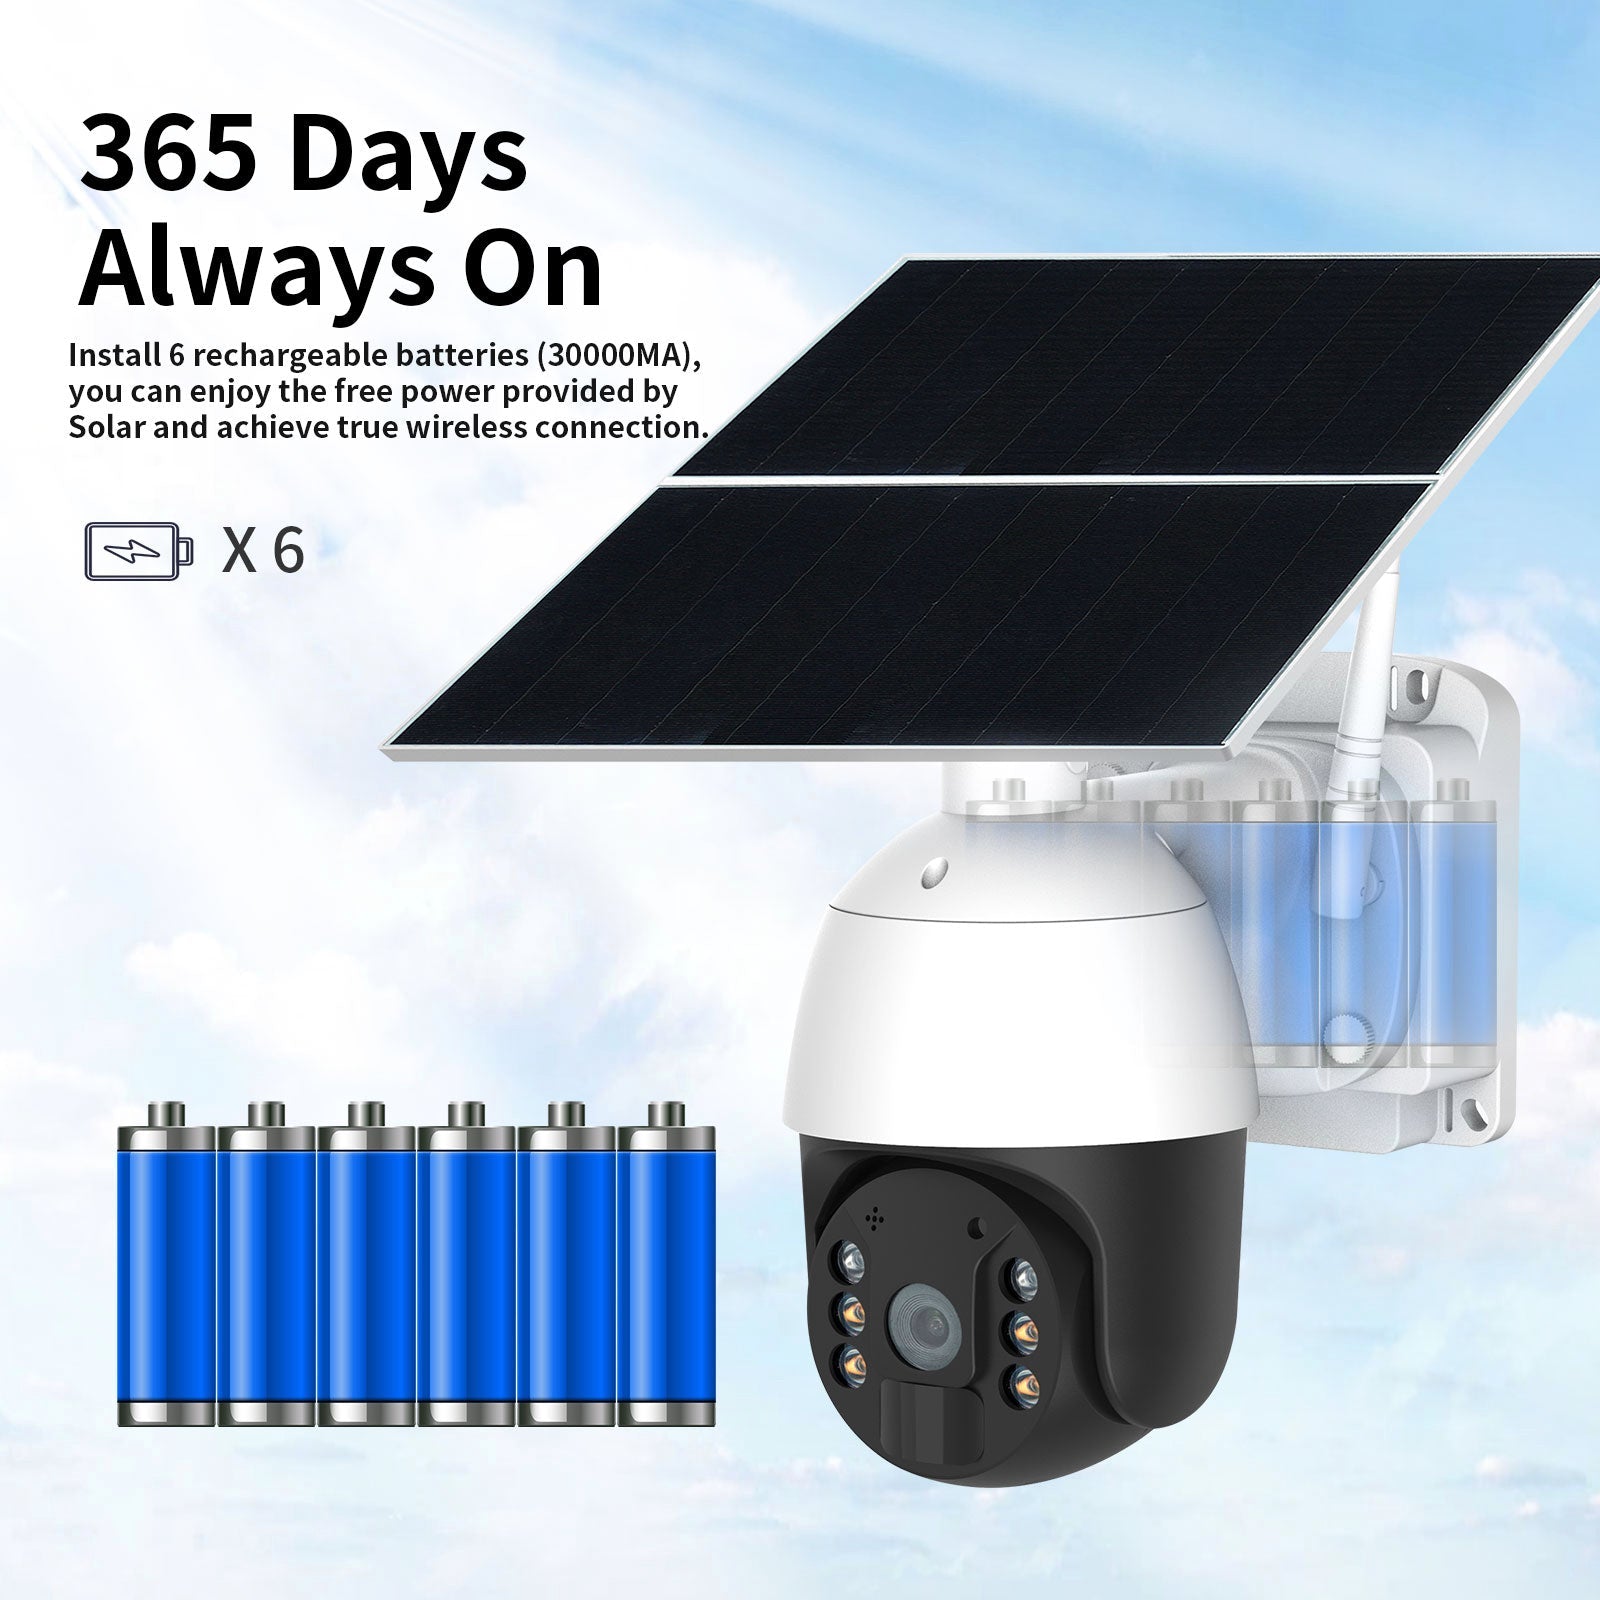 Complete and Easy to Install 4G LTE Solar Powered Camera System with 4